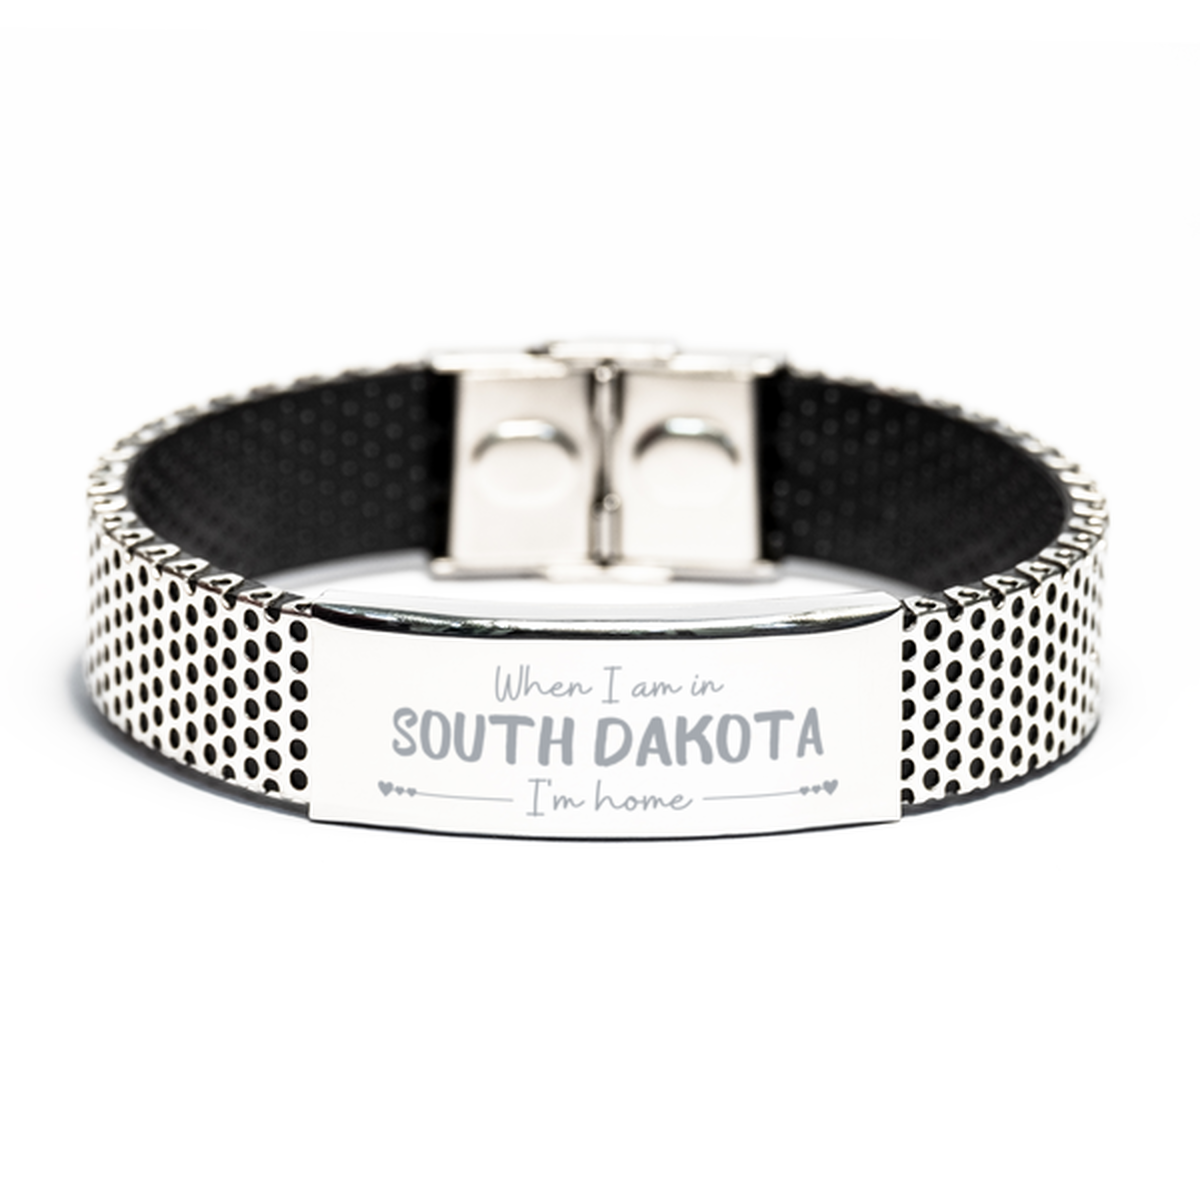 When I am in South Dakota I'm home Stainless Steel Bracelet, Cheap Gifts For South Dakota, State South Dakota Birthday Gifts for Friends Coworker